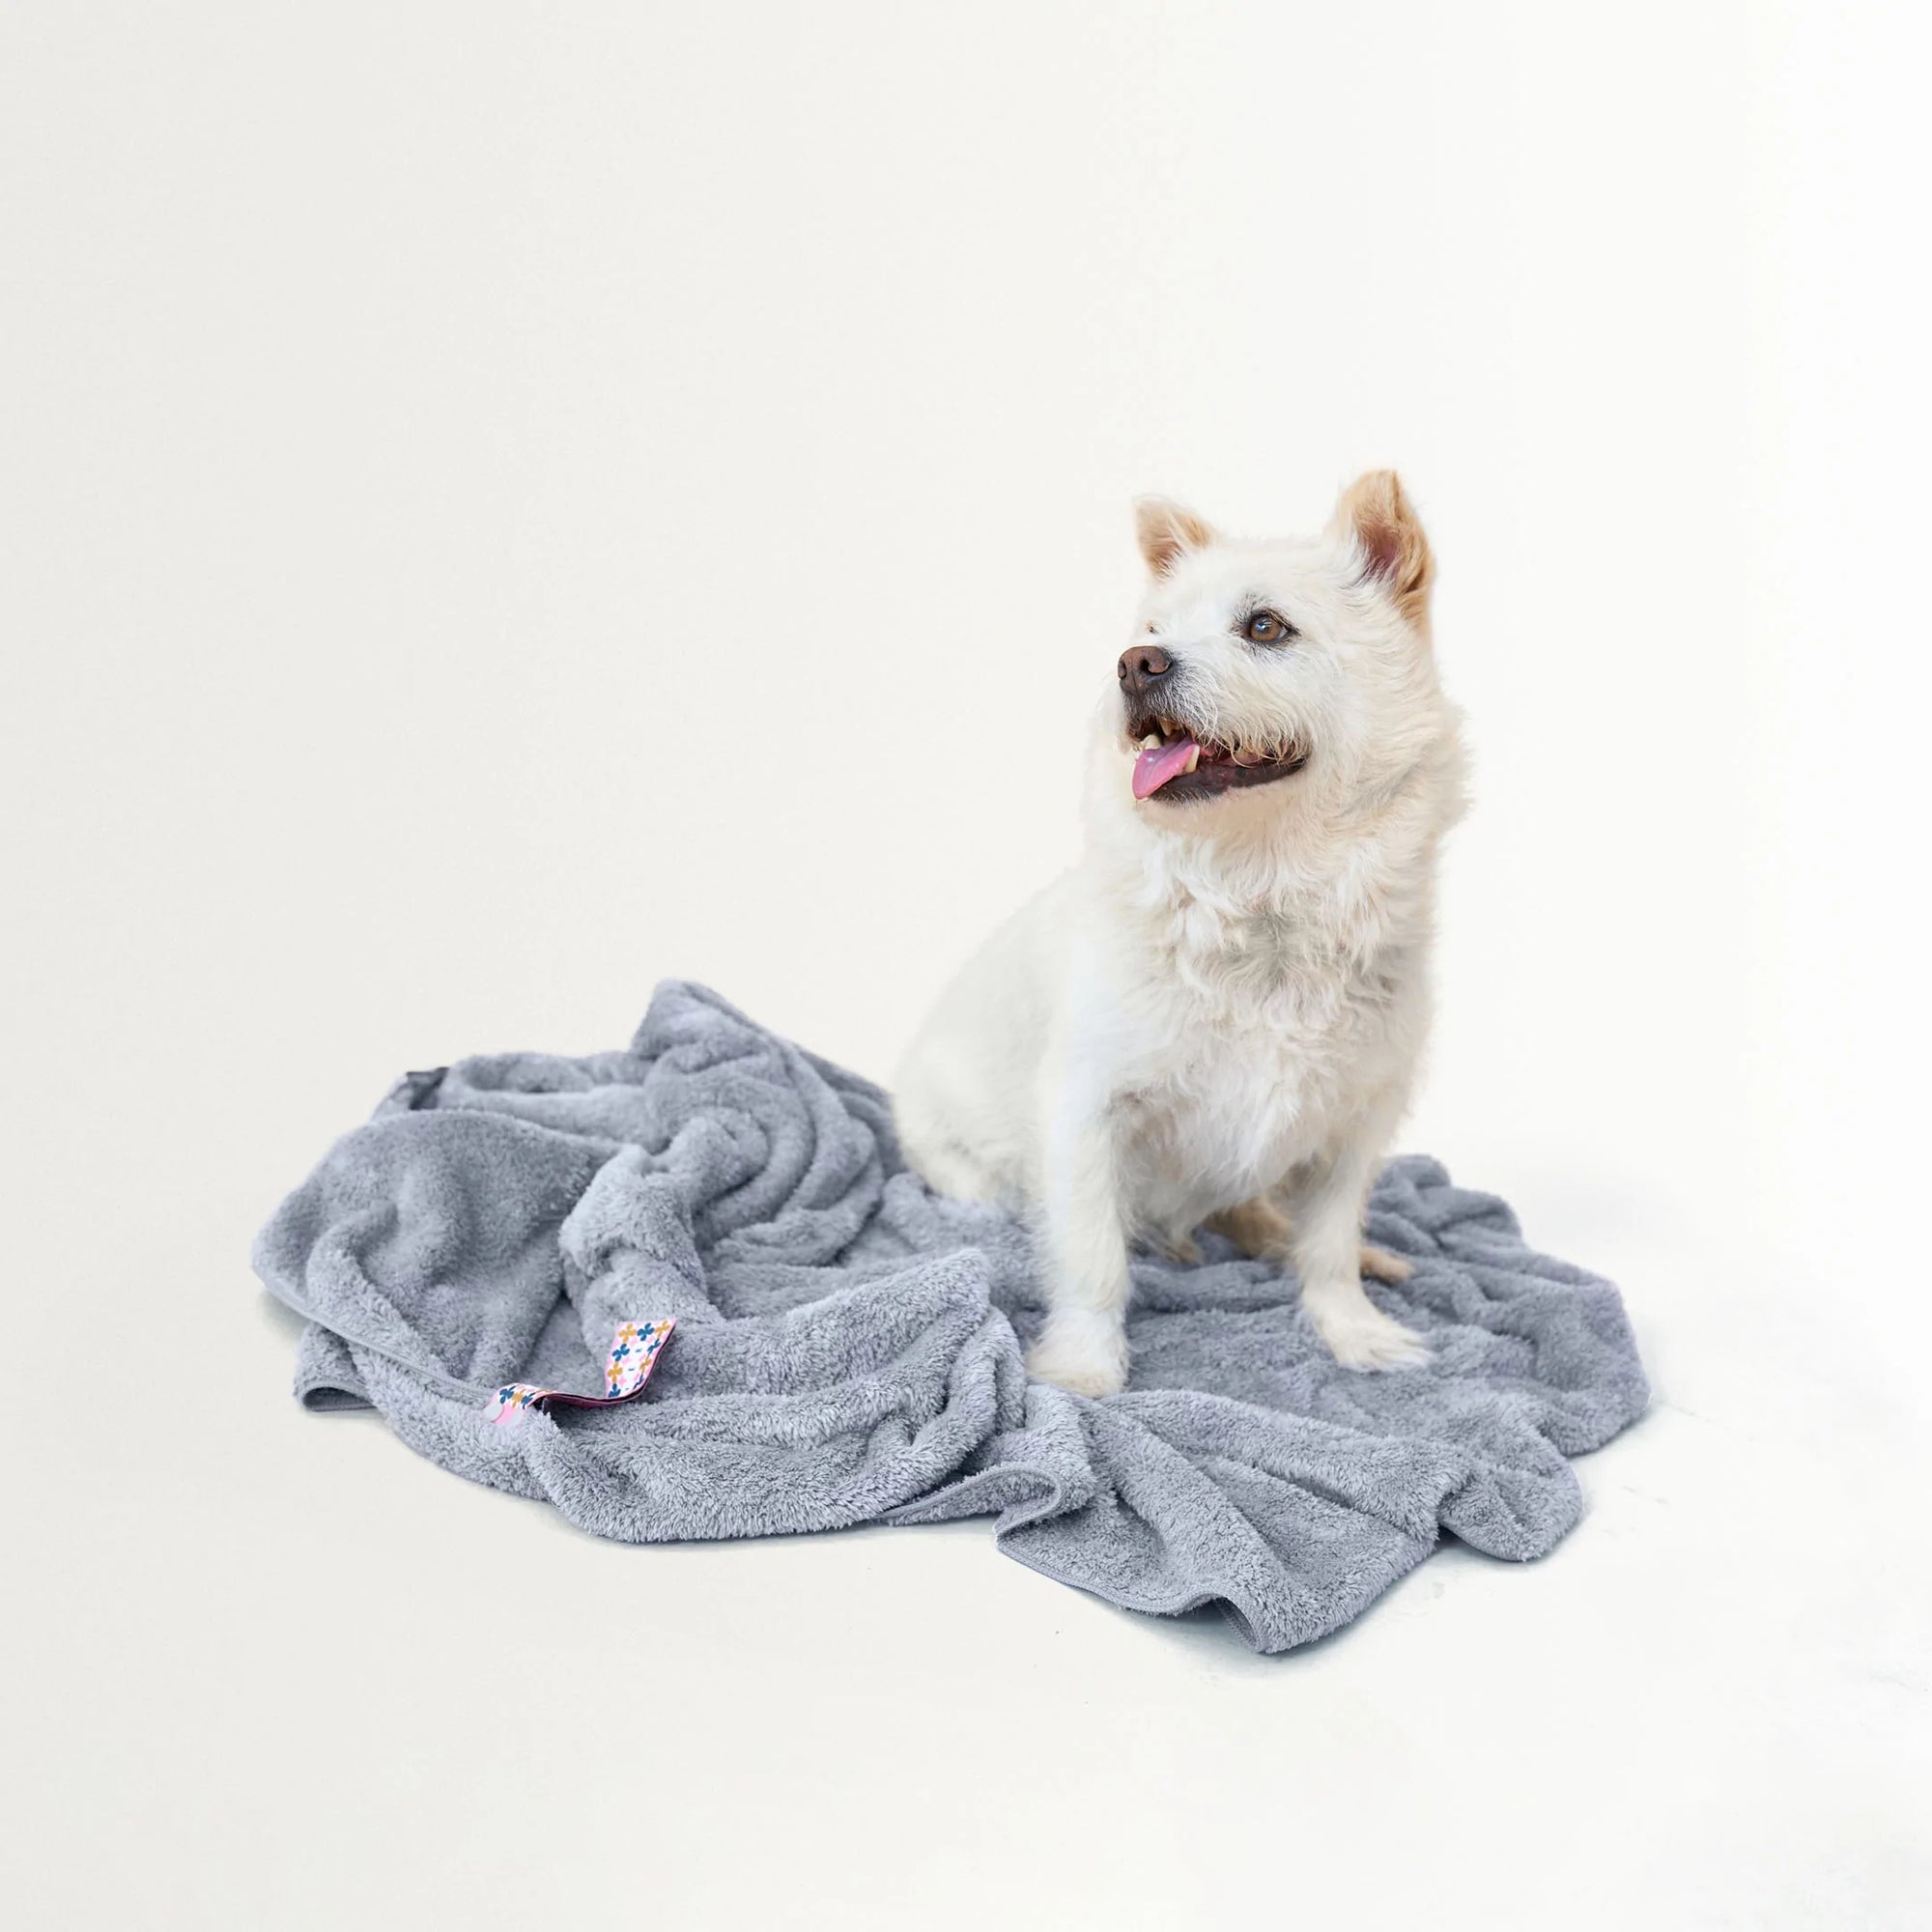 A contented dog nestled in a soft, grey pet towel, post-bath, enjoying the warmth and comfort it provides. The microfiber fabric ensures effective drying and coziness, making it an essential addition to your pet care routine. This towel promises a delightful and stress-free bath time experience for your furry companion.